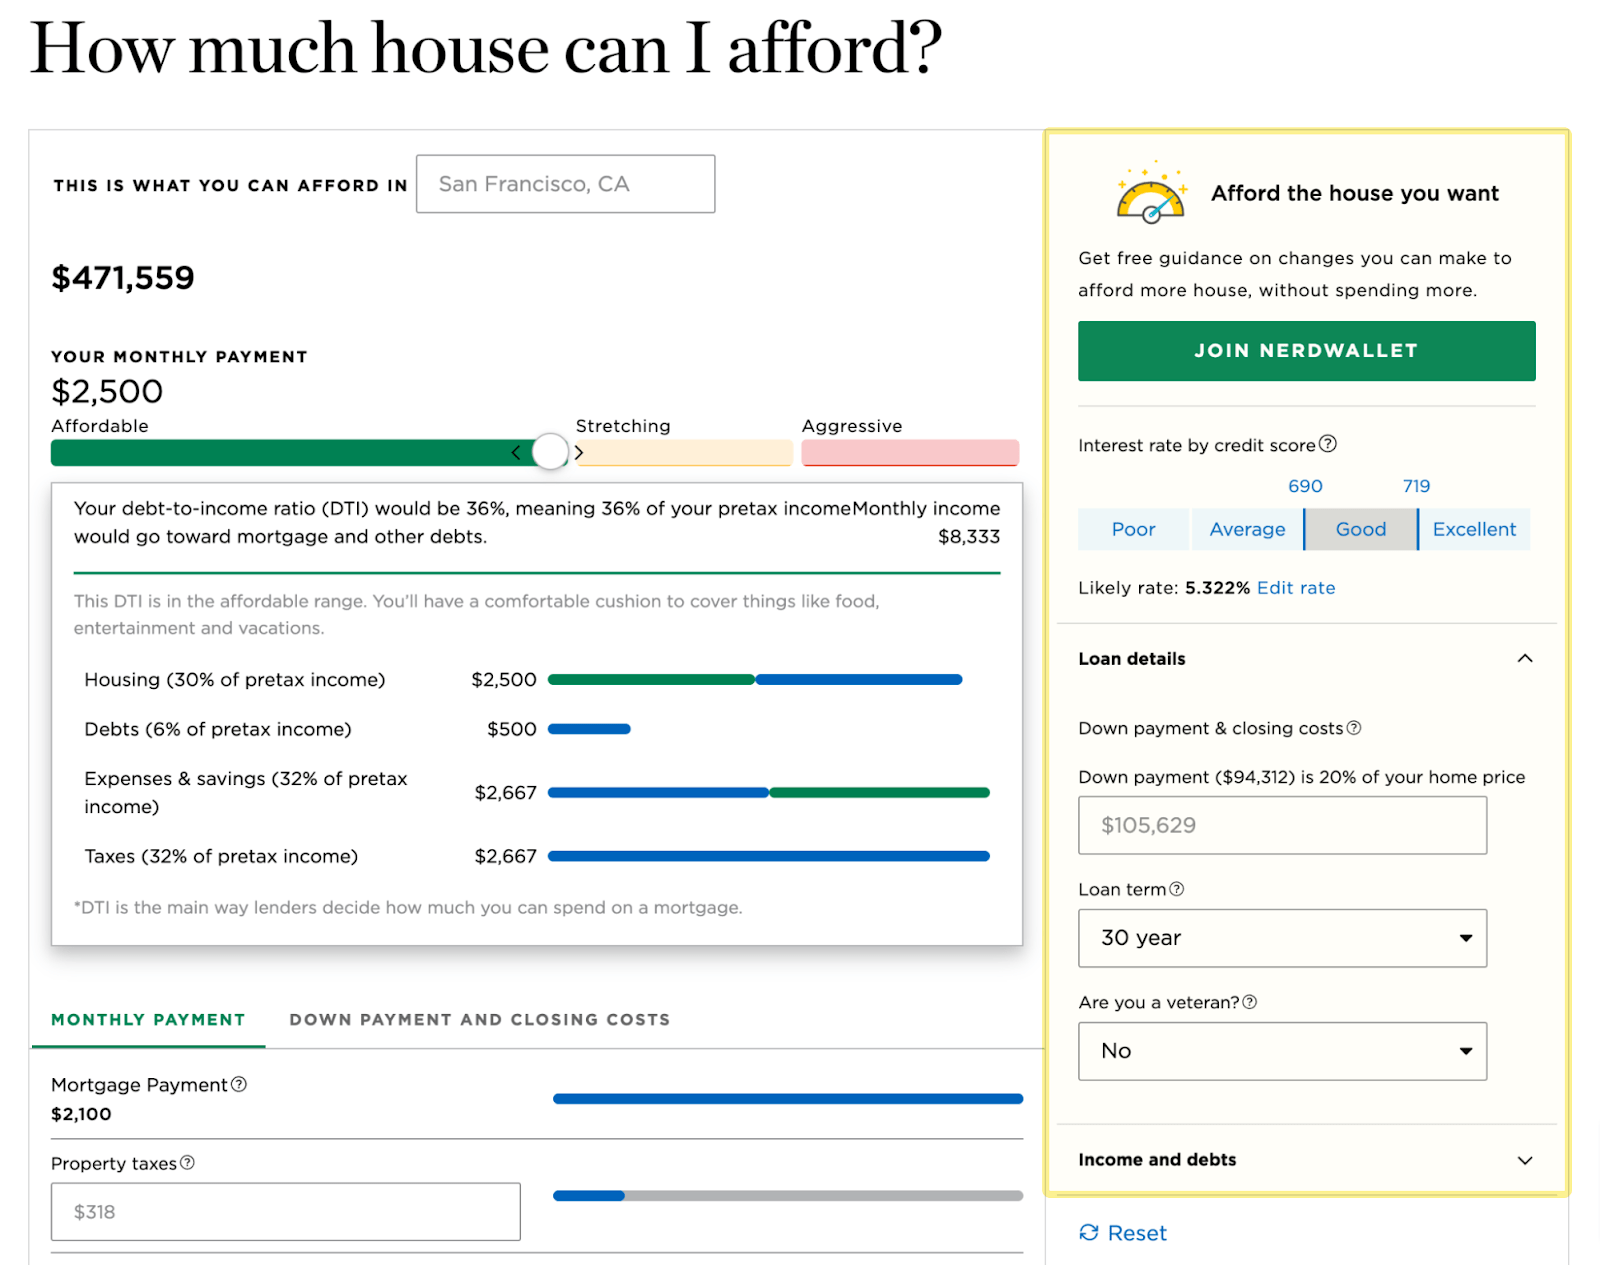 NerdWallet's calculator. On right, CTA button to click through and get free guidance on getting a better house